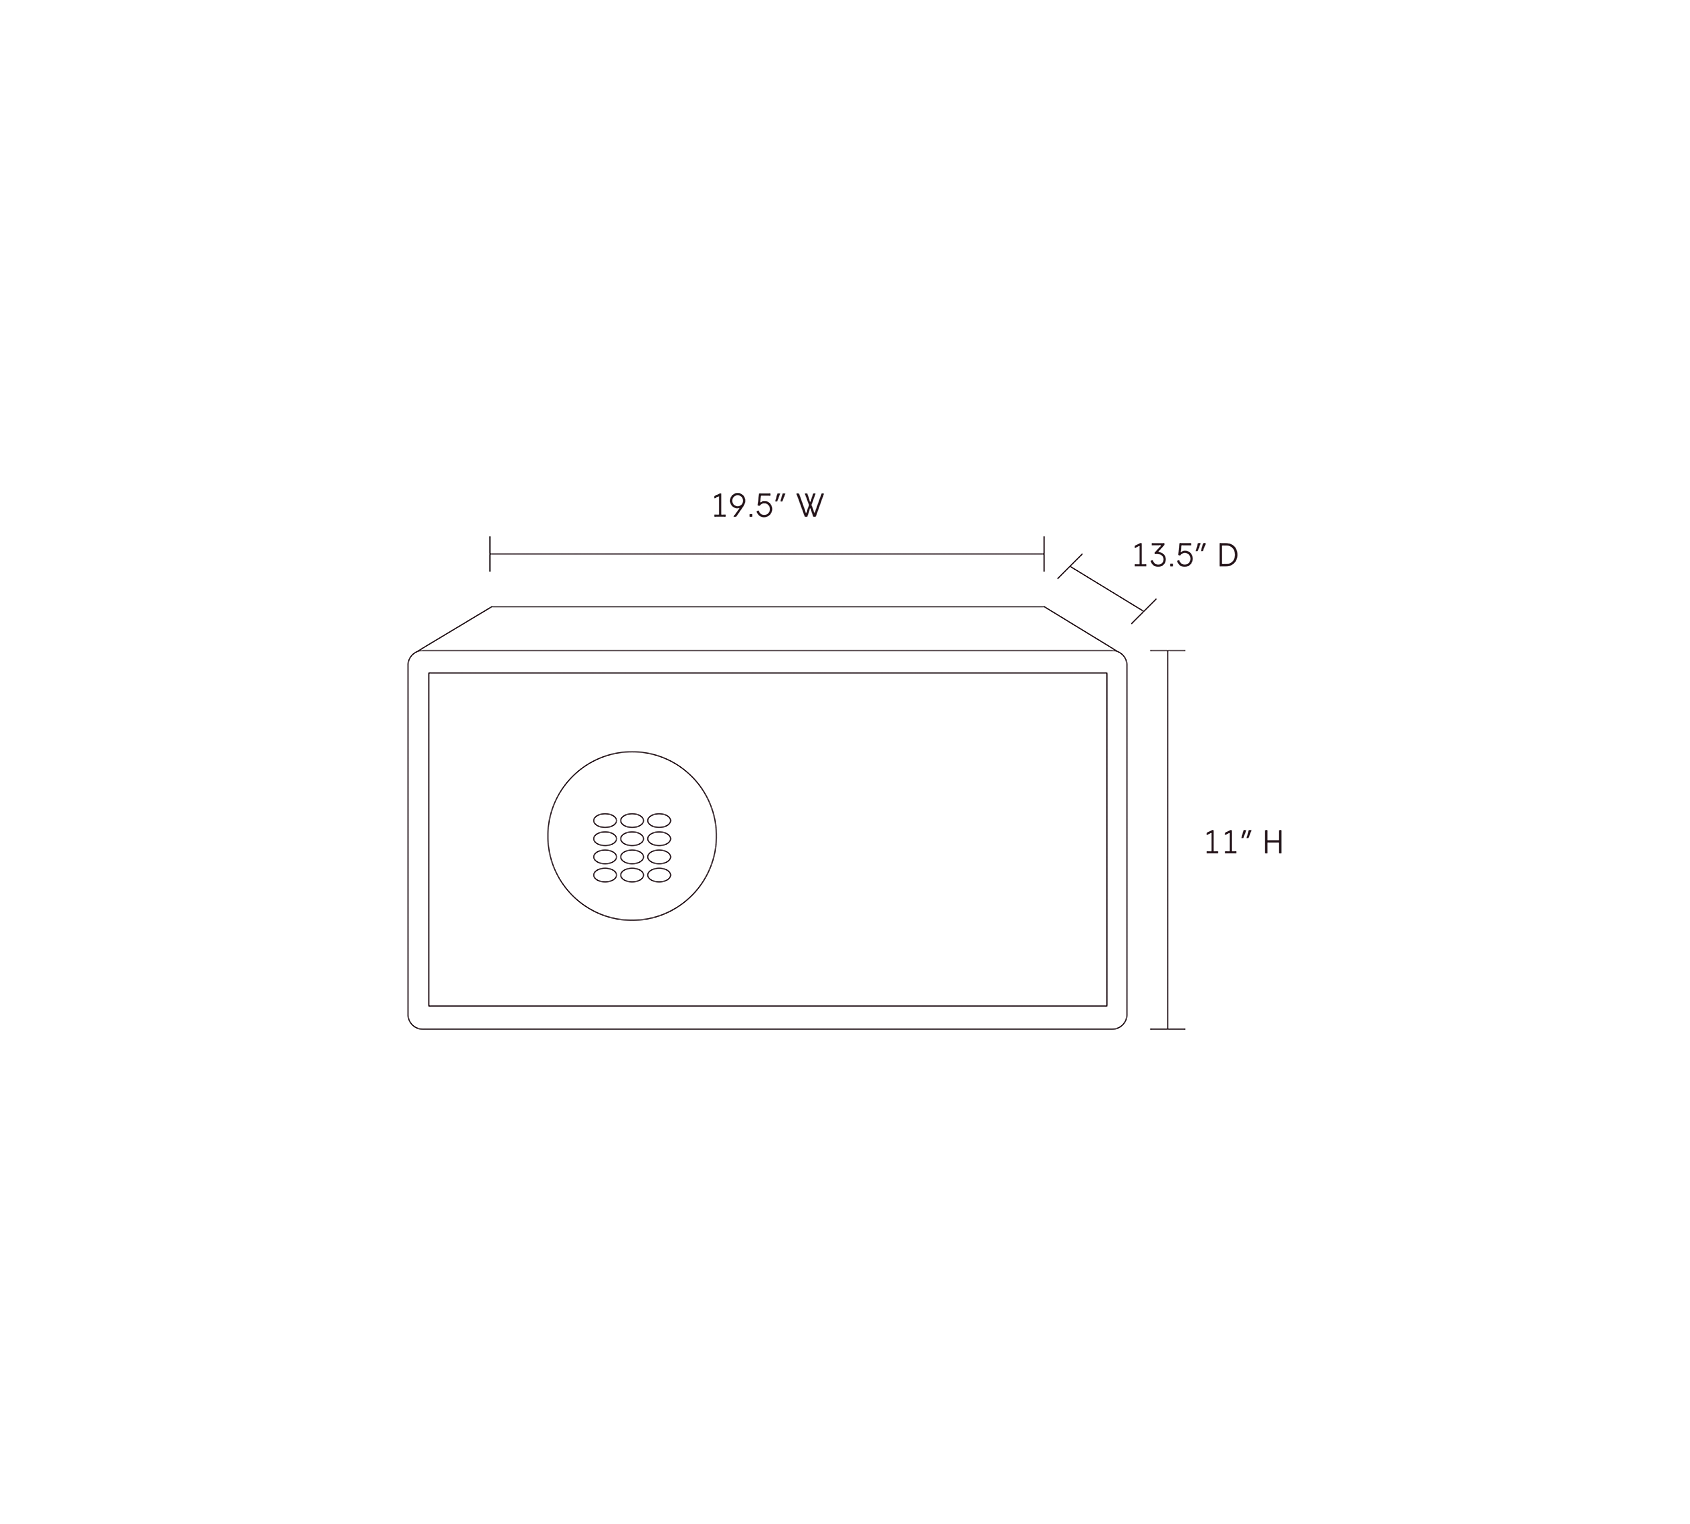 Line drawing of the Mycube Classic with dimensions of 19.5 inches in width, 13.5 inches in depth, and 11 inches in height